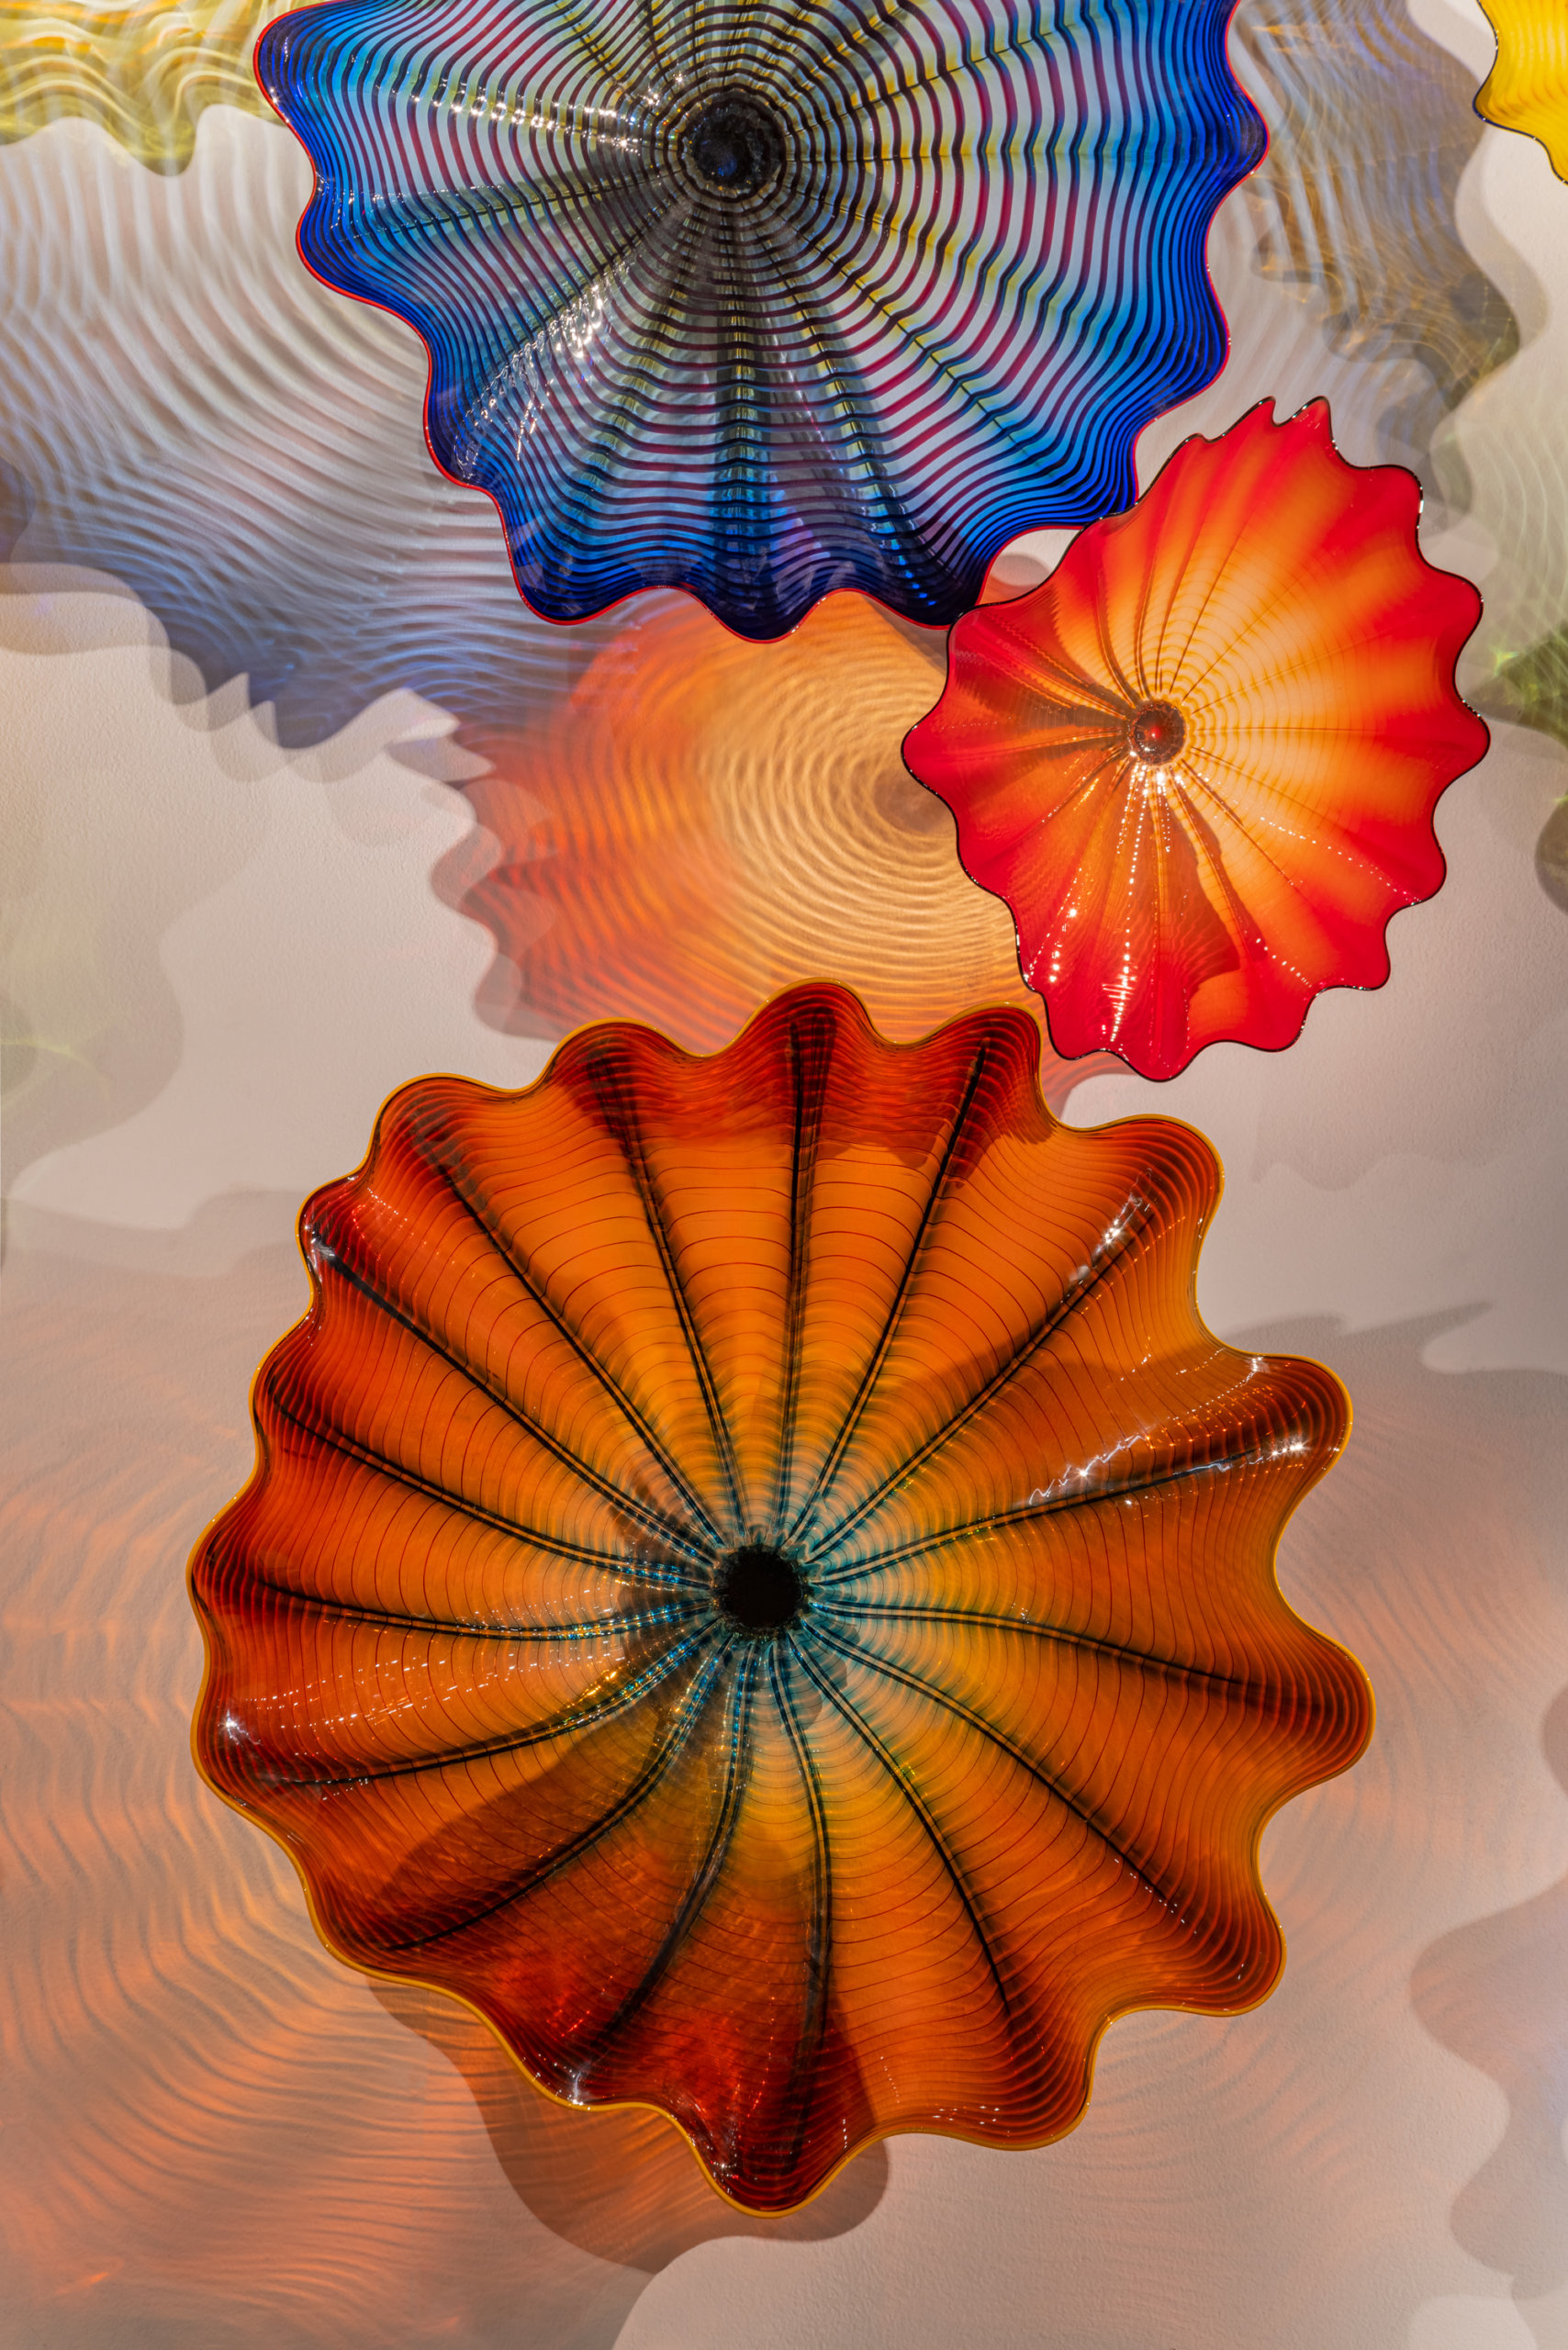 Dale Chihuly glass Fiori at Hampton Synagogue, as featured on the July 1, 2022 cover (uncropped)